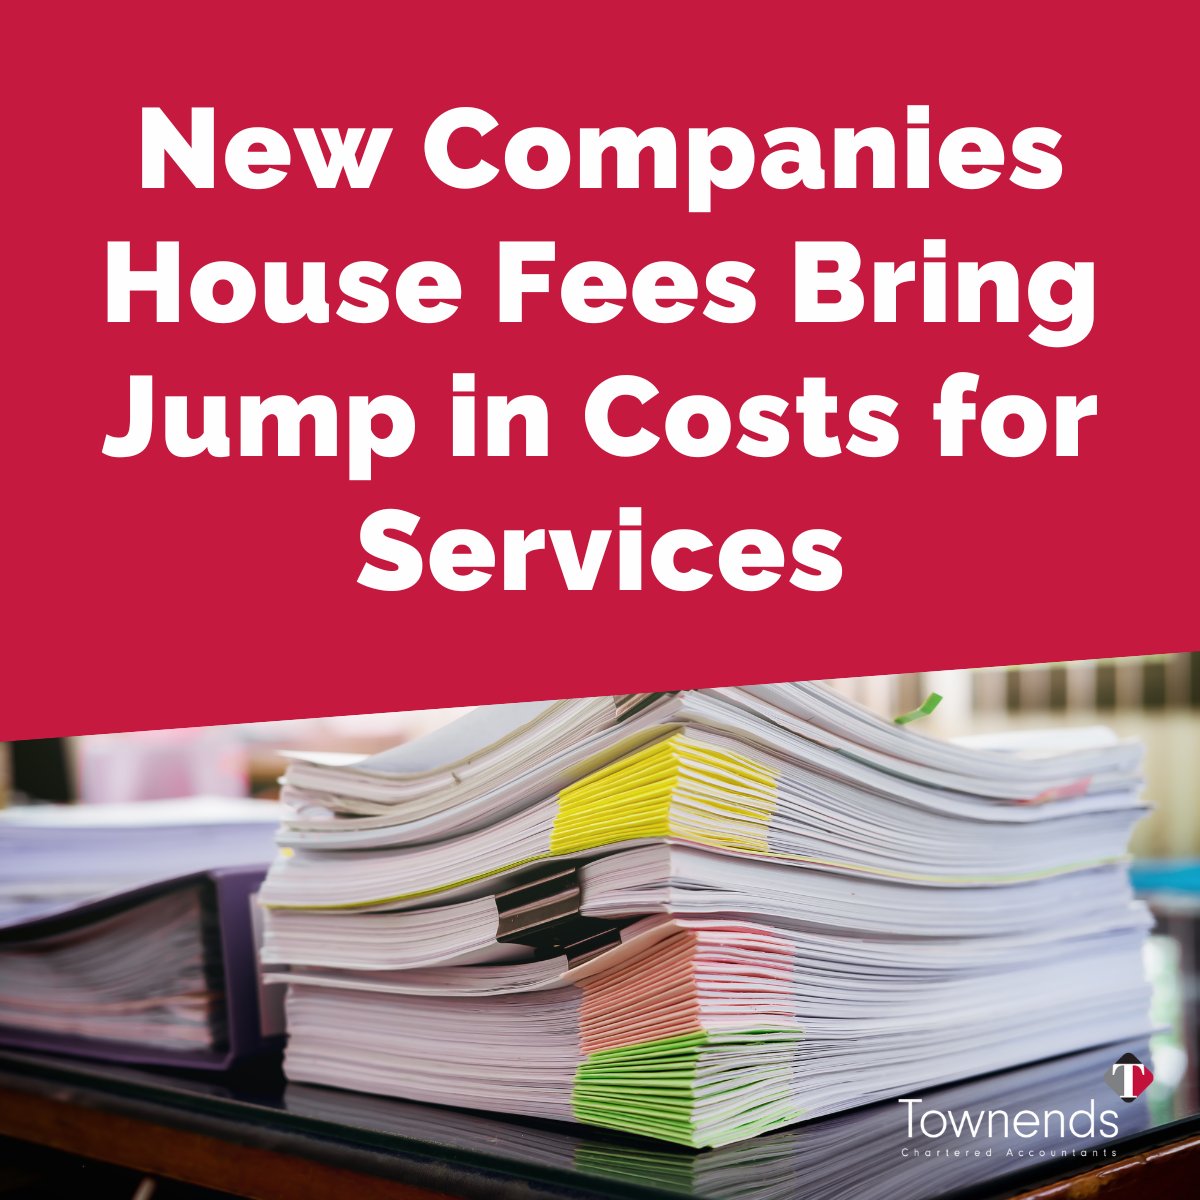 Companies House fees have increased, impacting all registered entities. 📈

Check out the full list of new fees and how they might affect your business here: icaew.com/insights/viewp…

#CompaniesHouse #BusinessFees